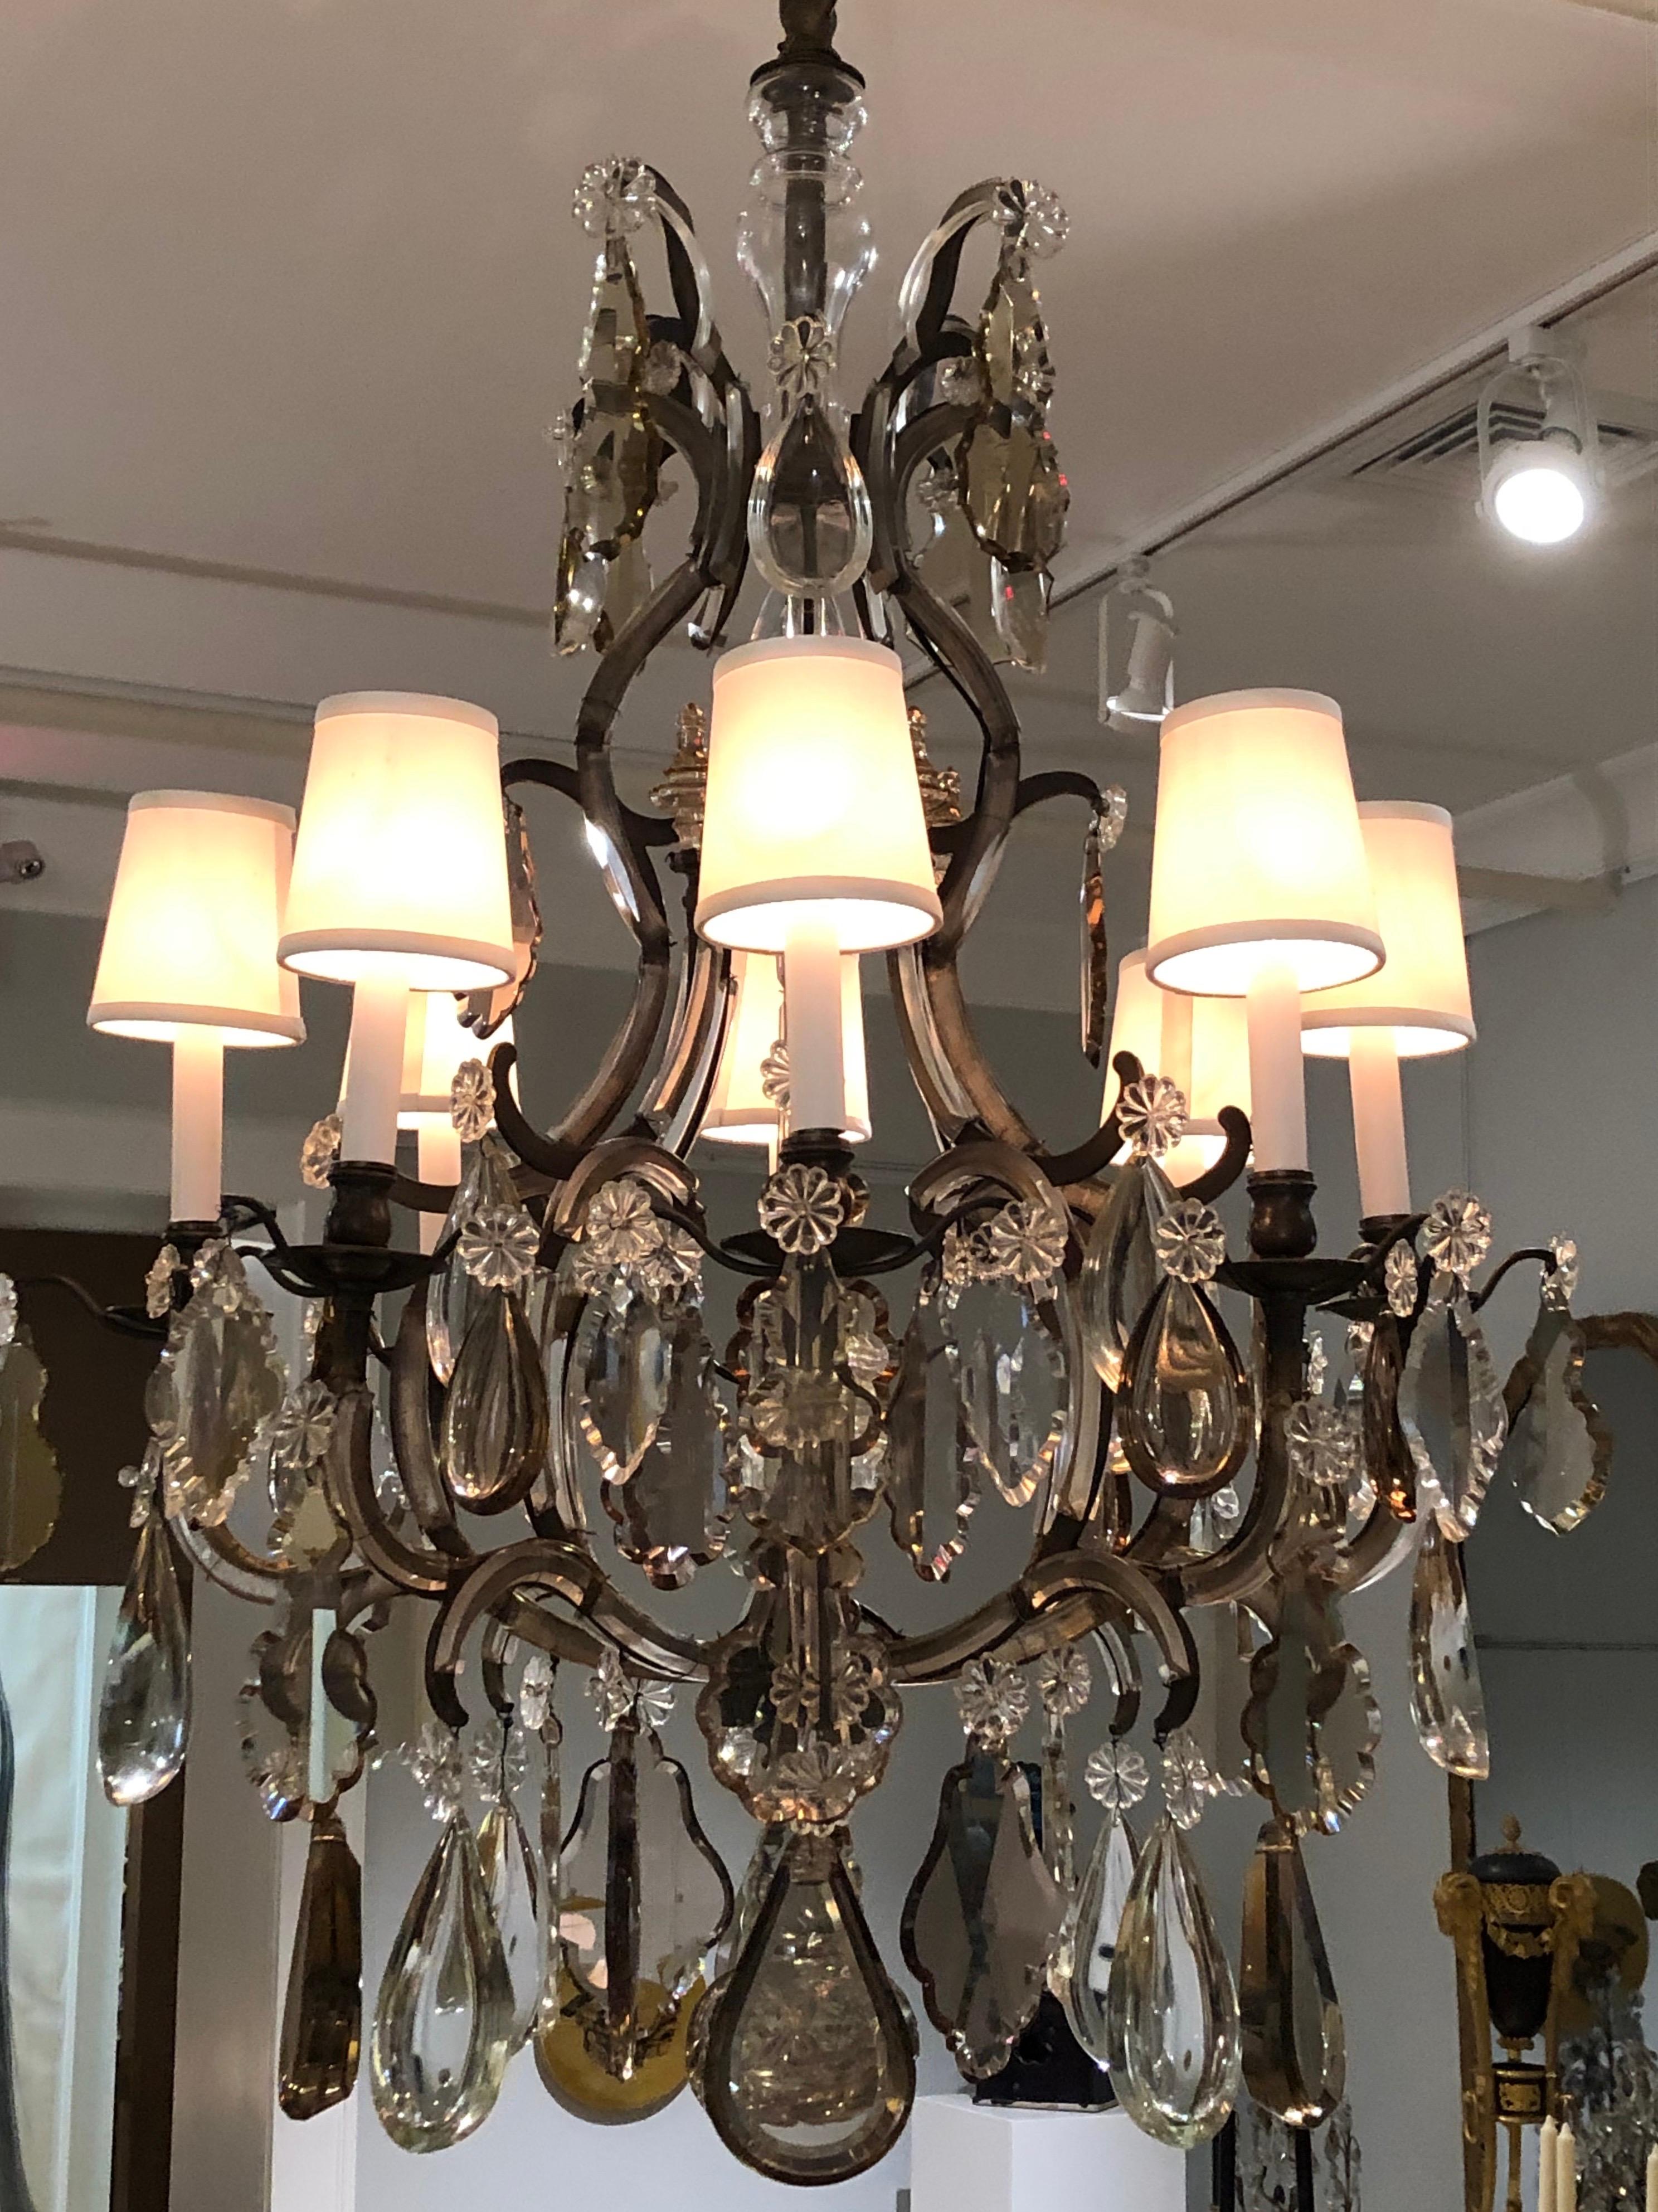 This 1930s French chandelier adapts an Ancien Régime form to Café Society taste. The arms are trimmed with cut-glass arabesques, the frame is steel rather than ormolu, and it's festooned with prisms cut from thick slabs of clear and bronze crystal.